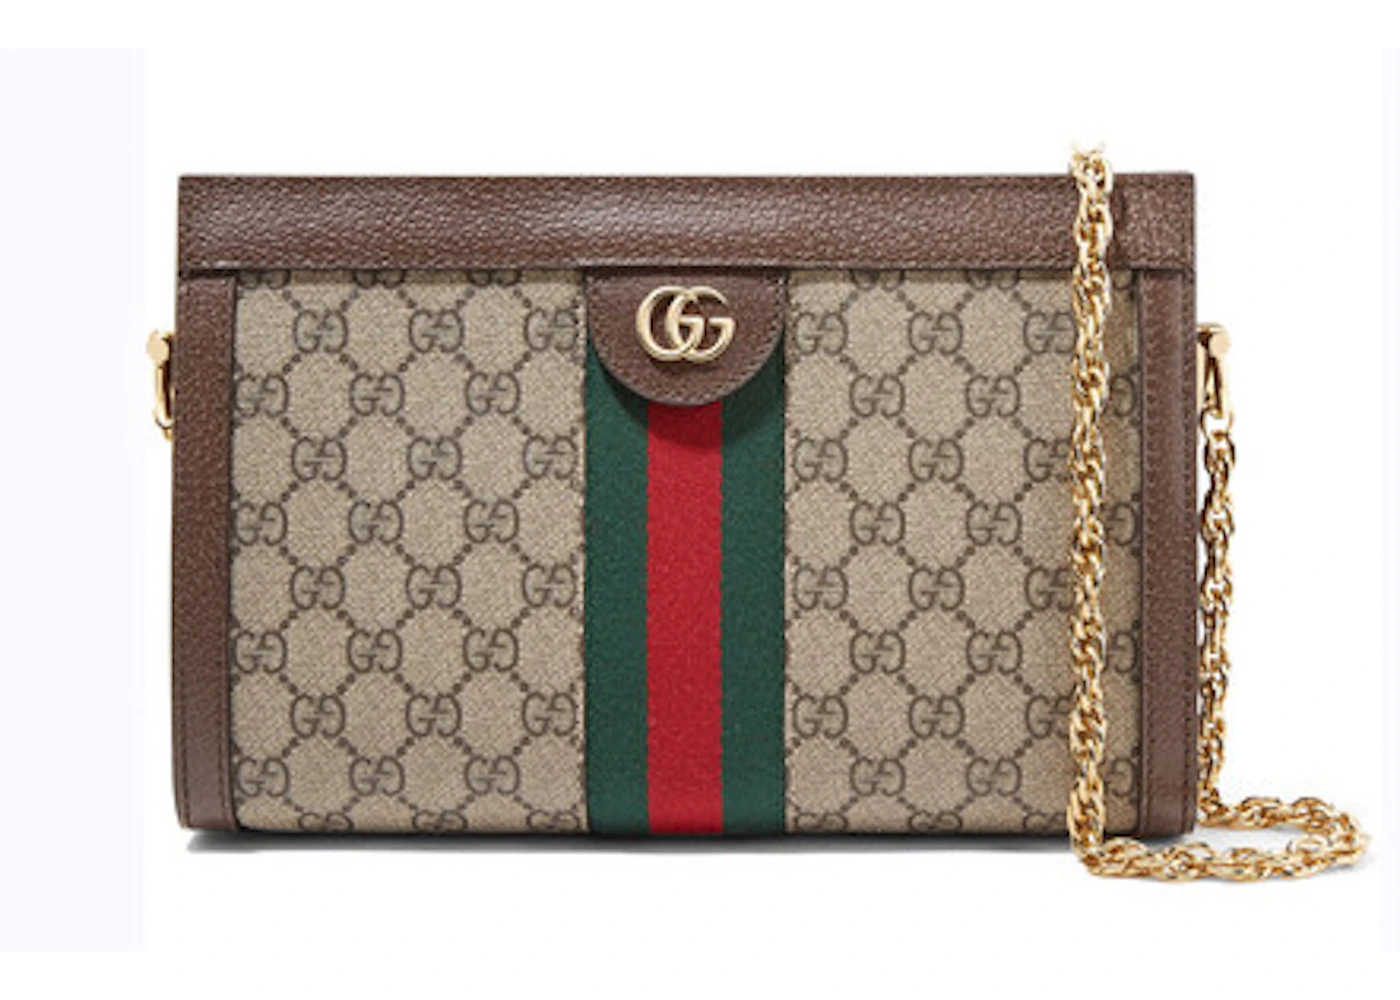 GUCCI GG Supreme Monogram Web Ophidia Continental Wallet Brown